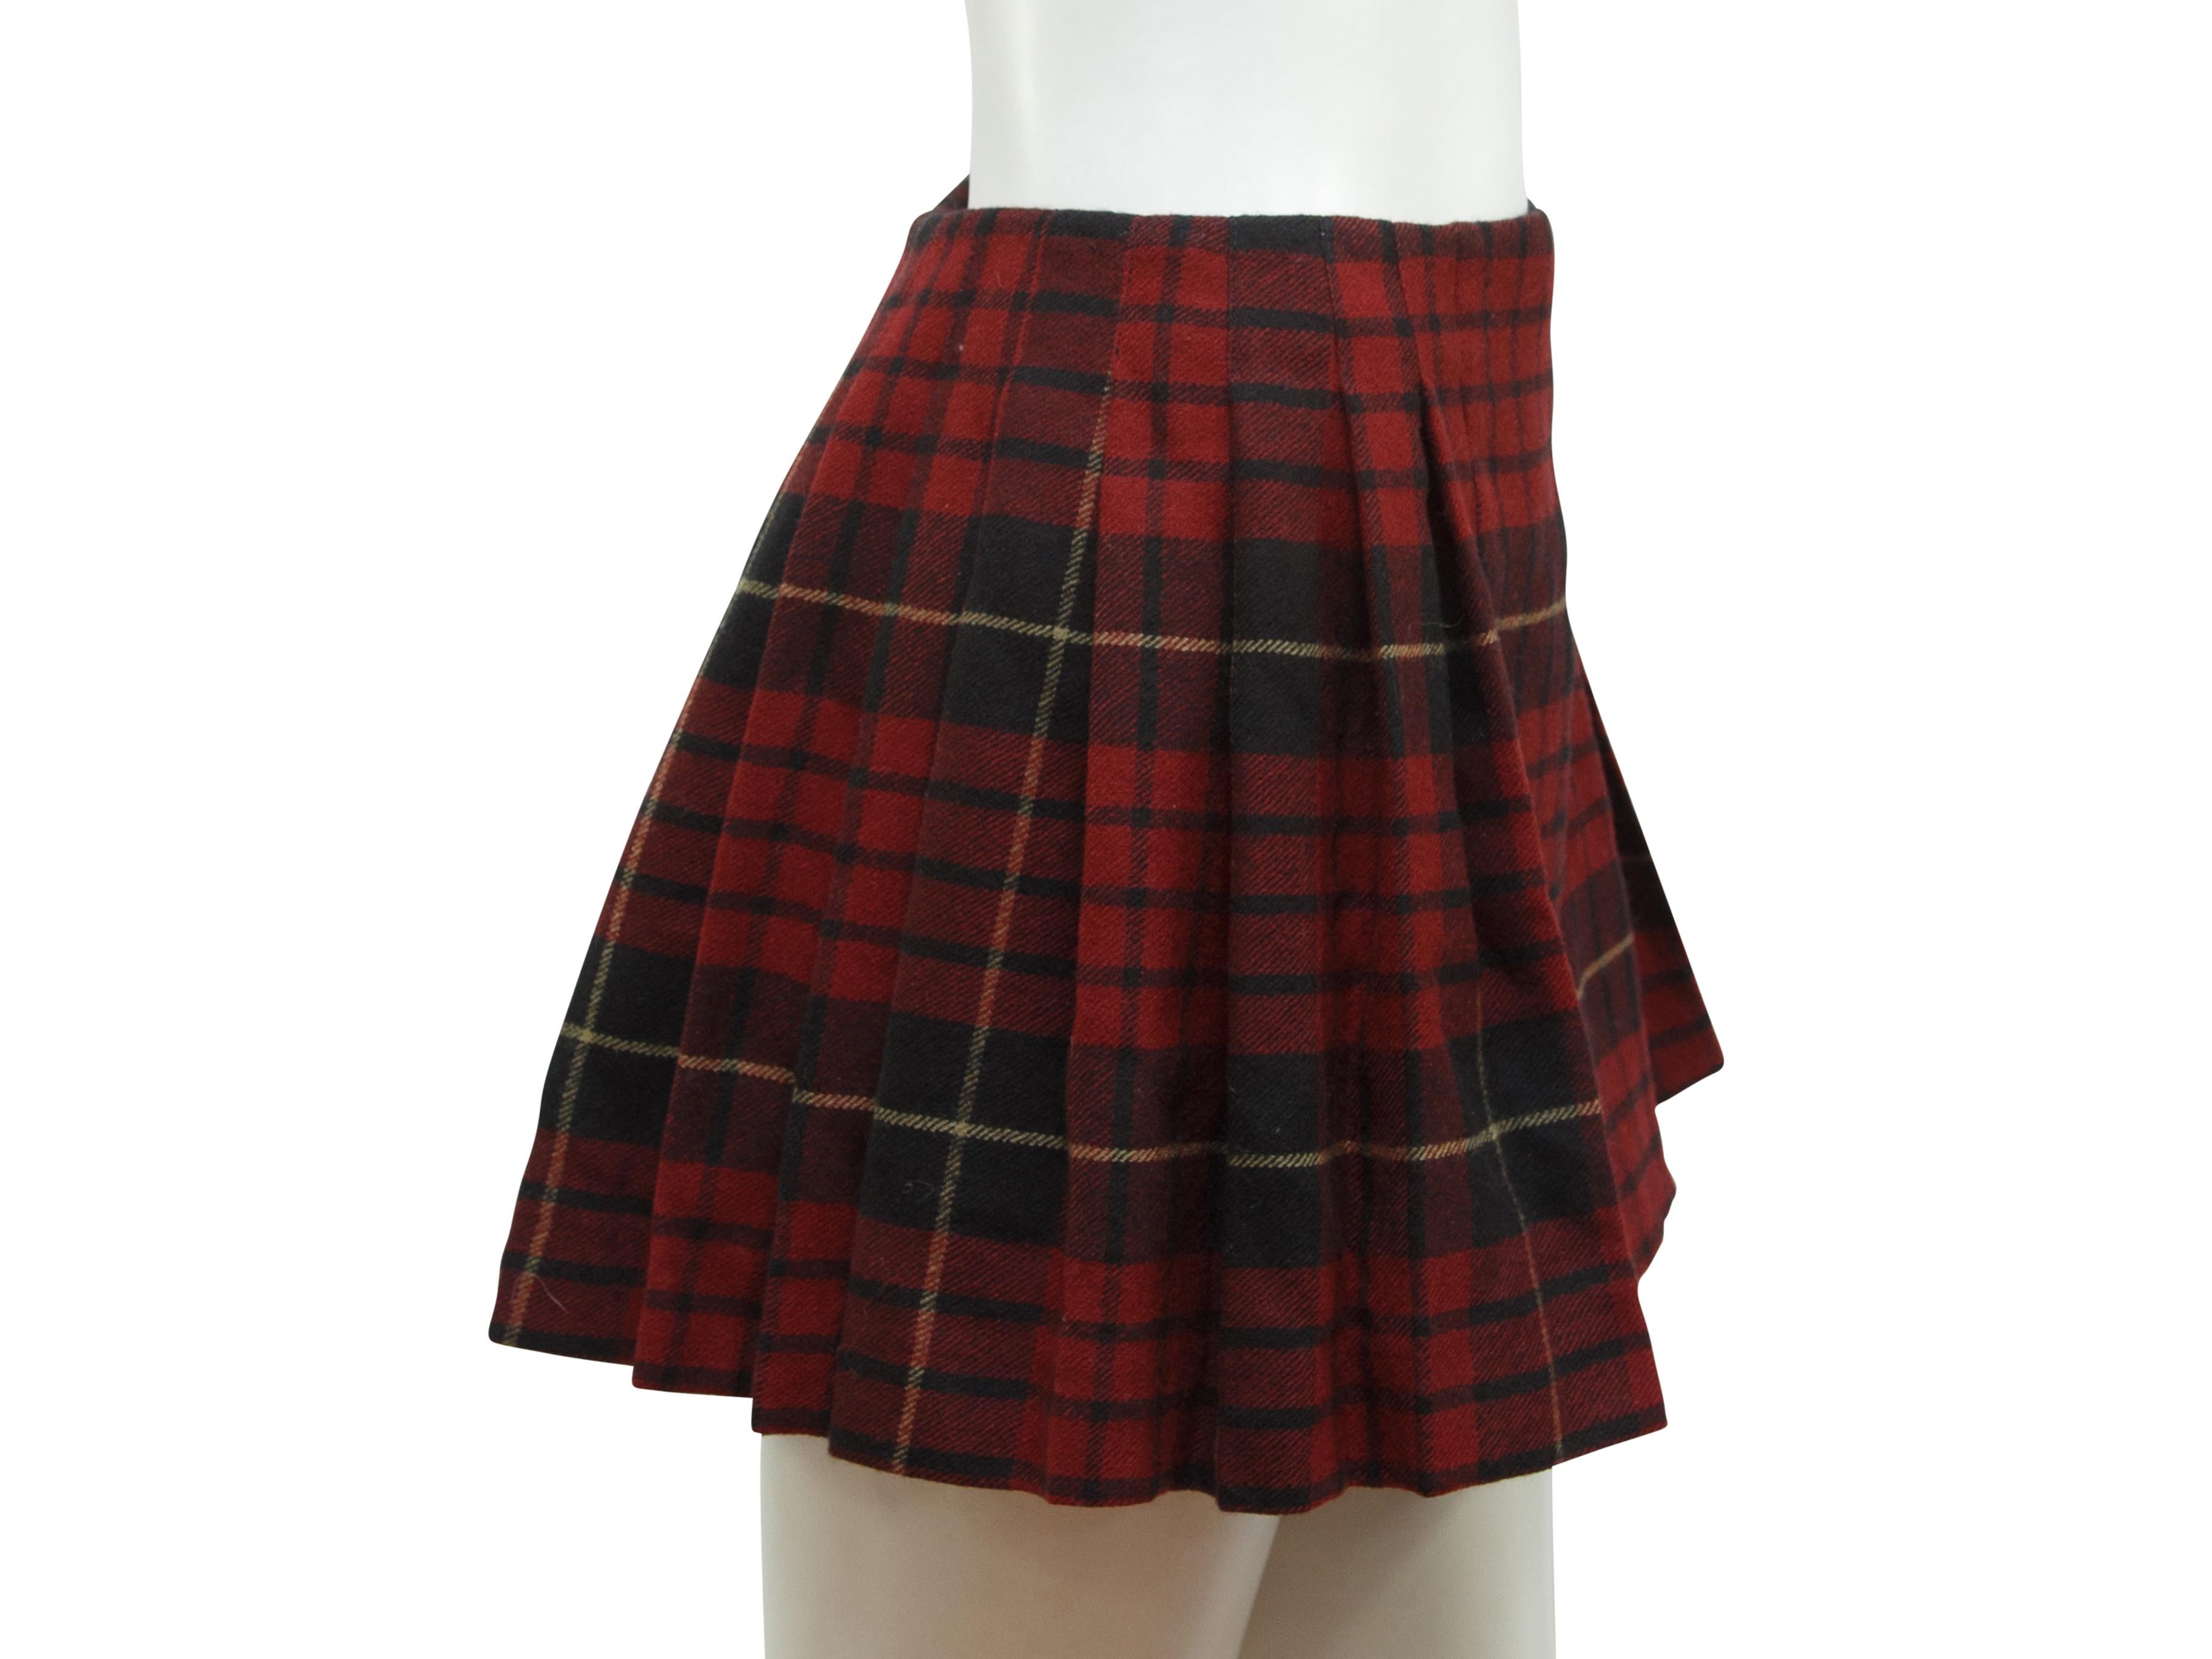 Product details:  Red tartan plaid mini kilt skirt by McQ Alexander McQueen.  Trimmed with black leather.  Adjustable double buckle closure.  Pleated back.  Label size IT 38.  27